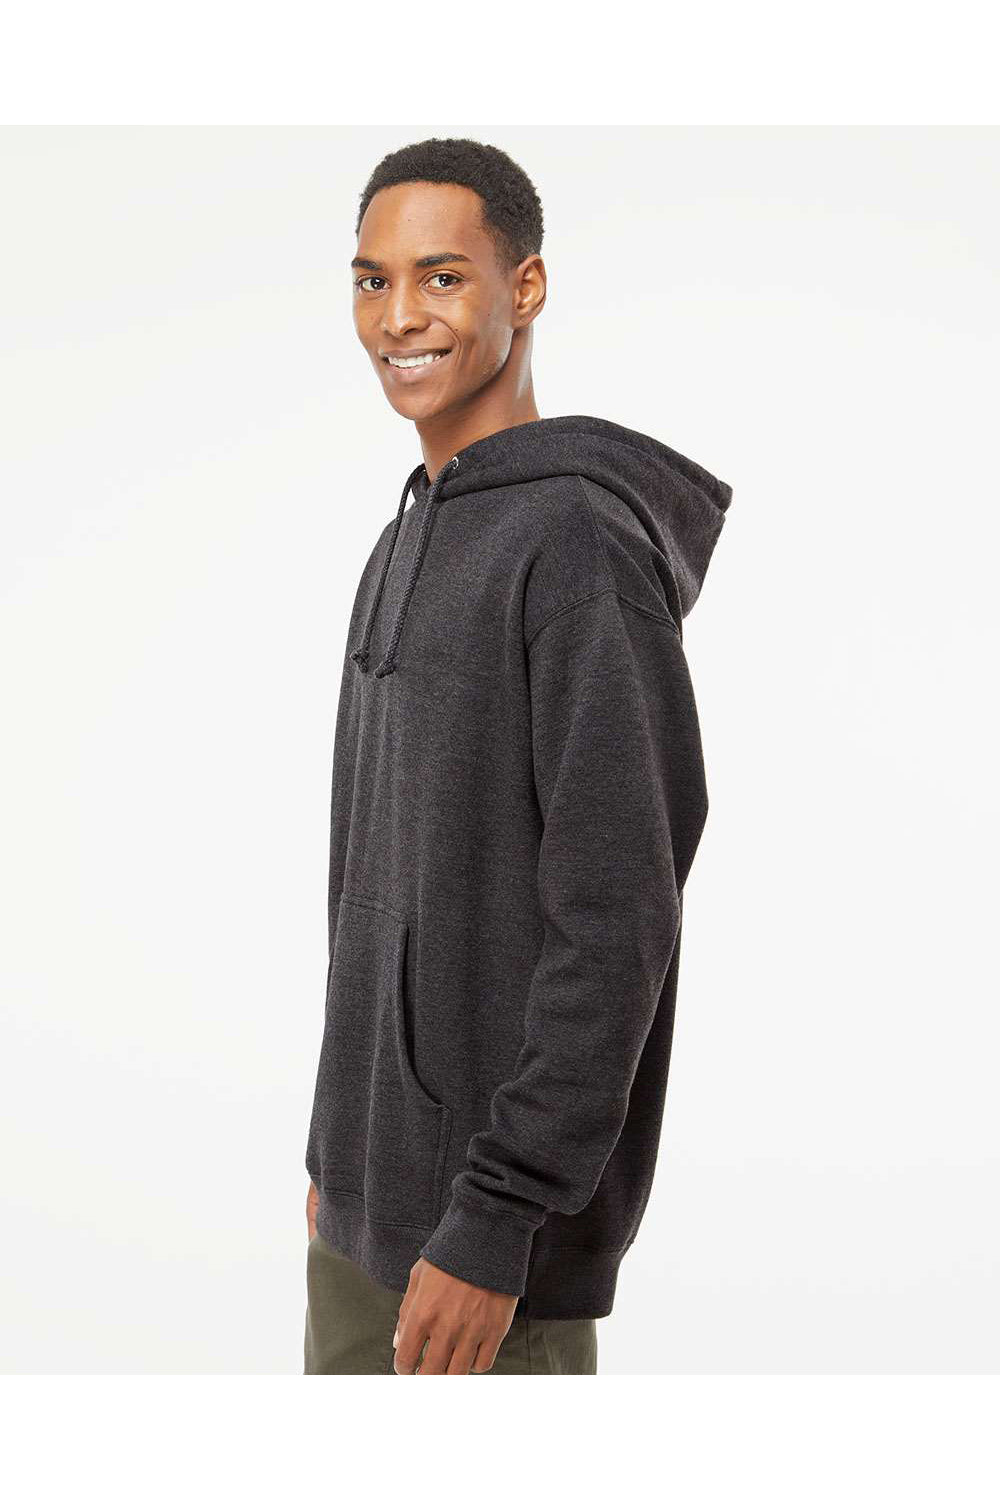 Independent Trading Co. IND4000 Mens Hooded Sweatshirt Hoodie Heather Charcoal Grey Model Side